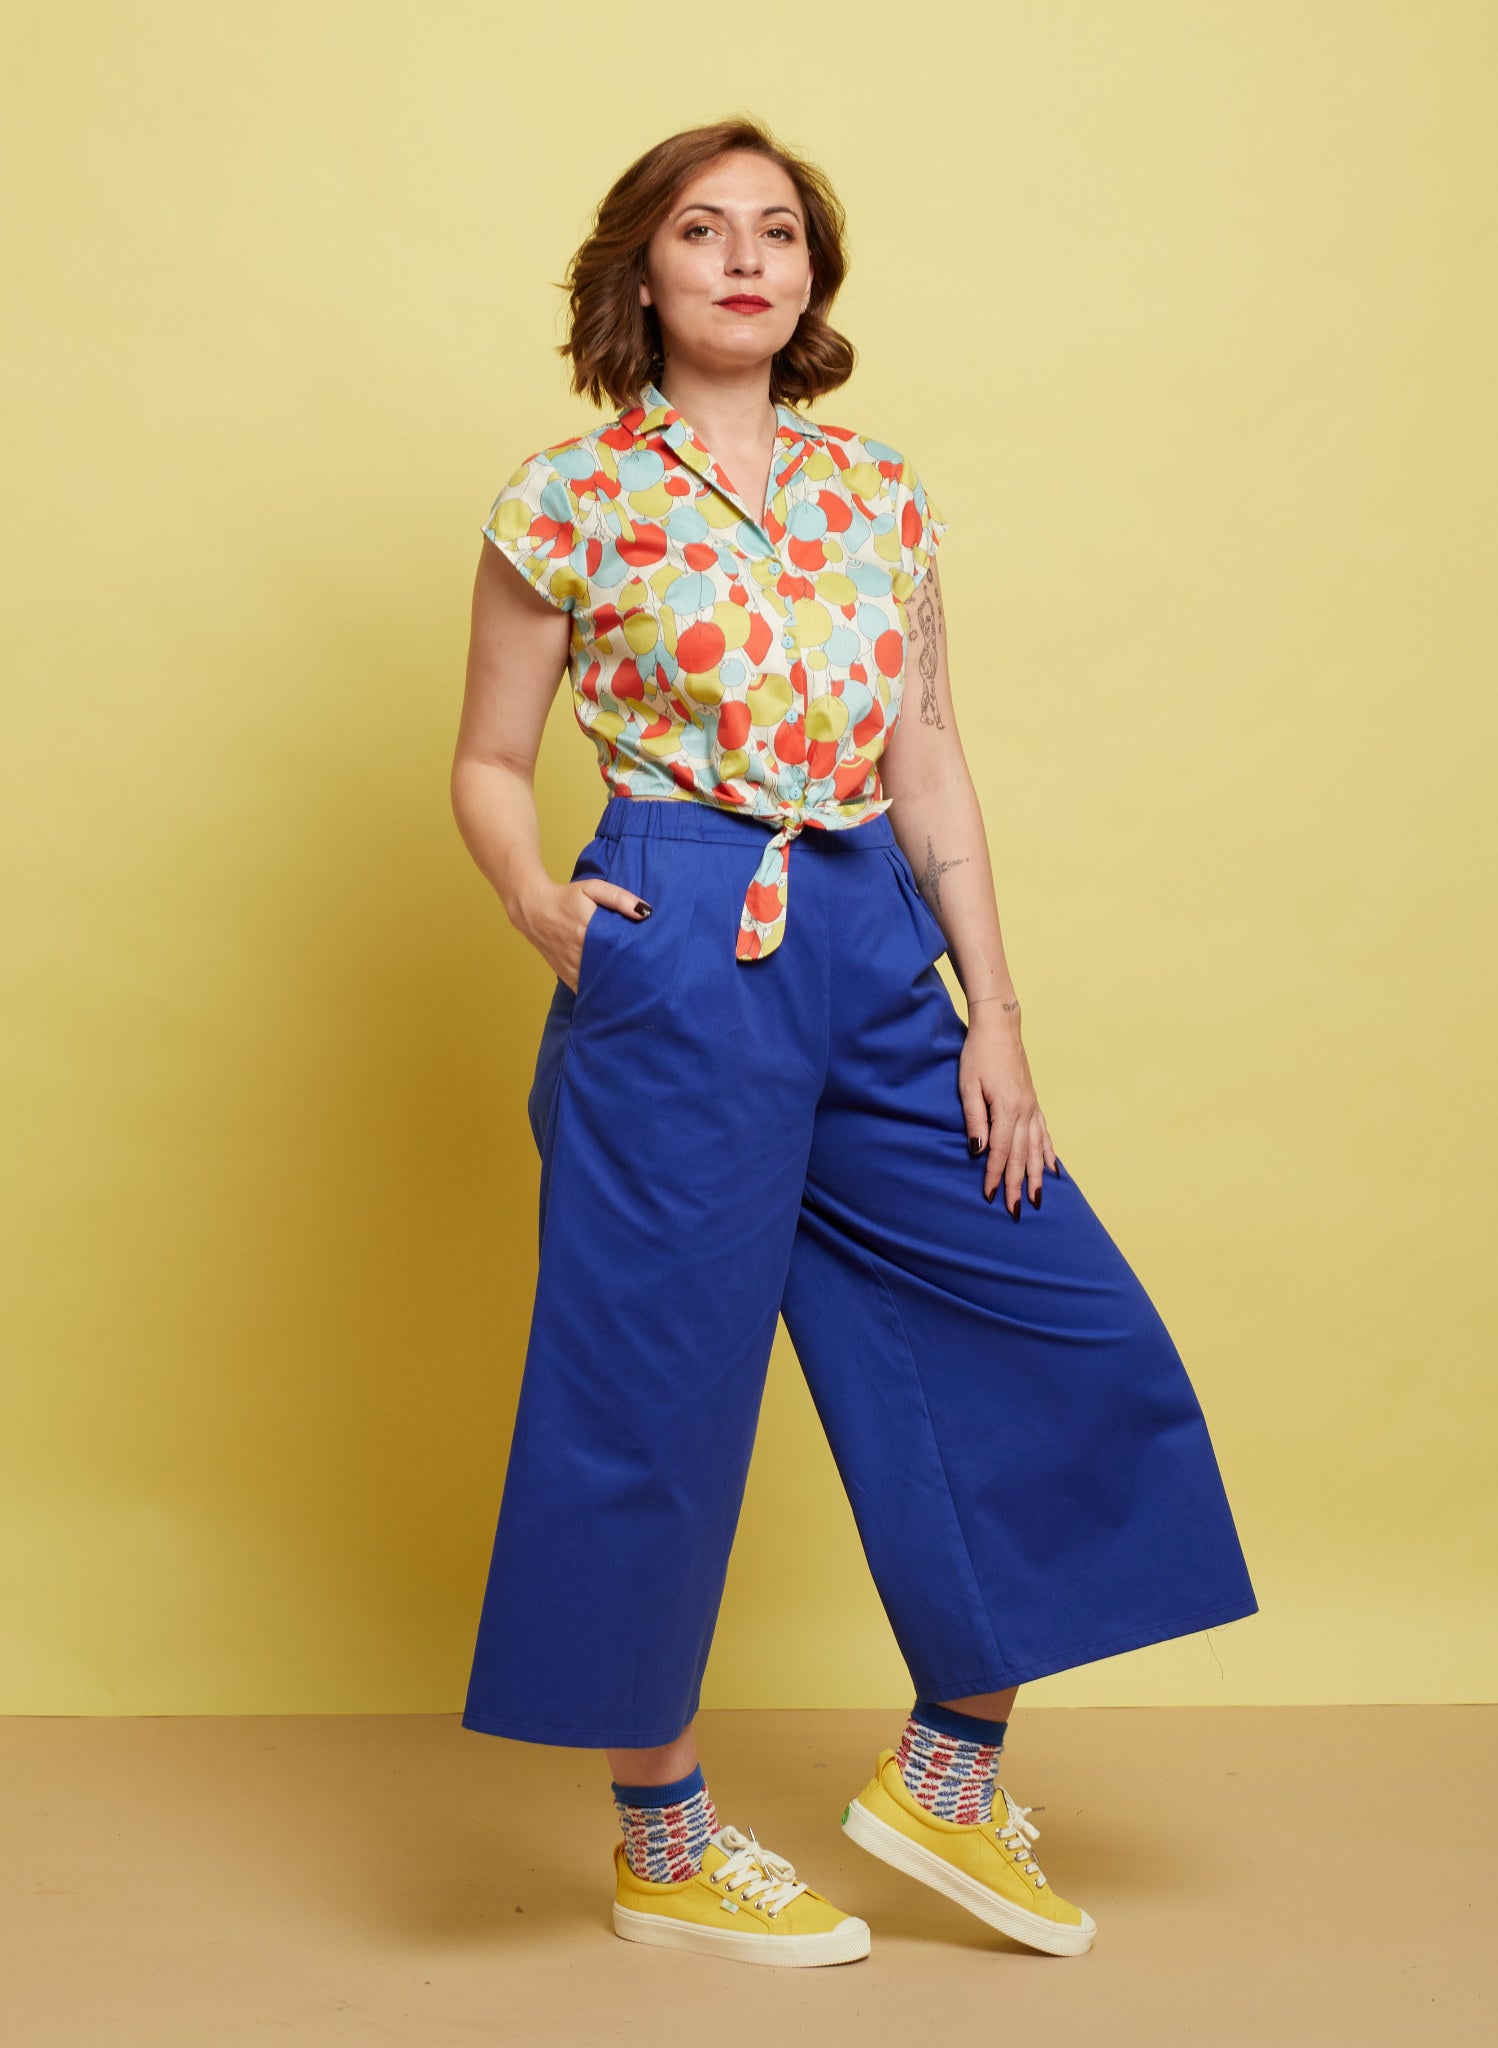 Colourful Buoys Tie-Waist Top | Organic Cotton | Made in UK